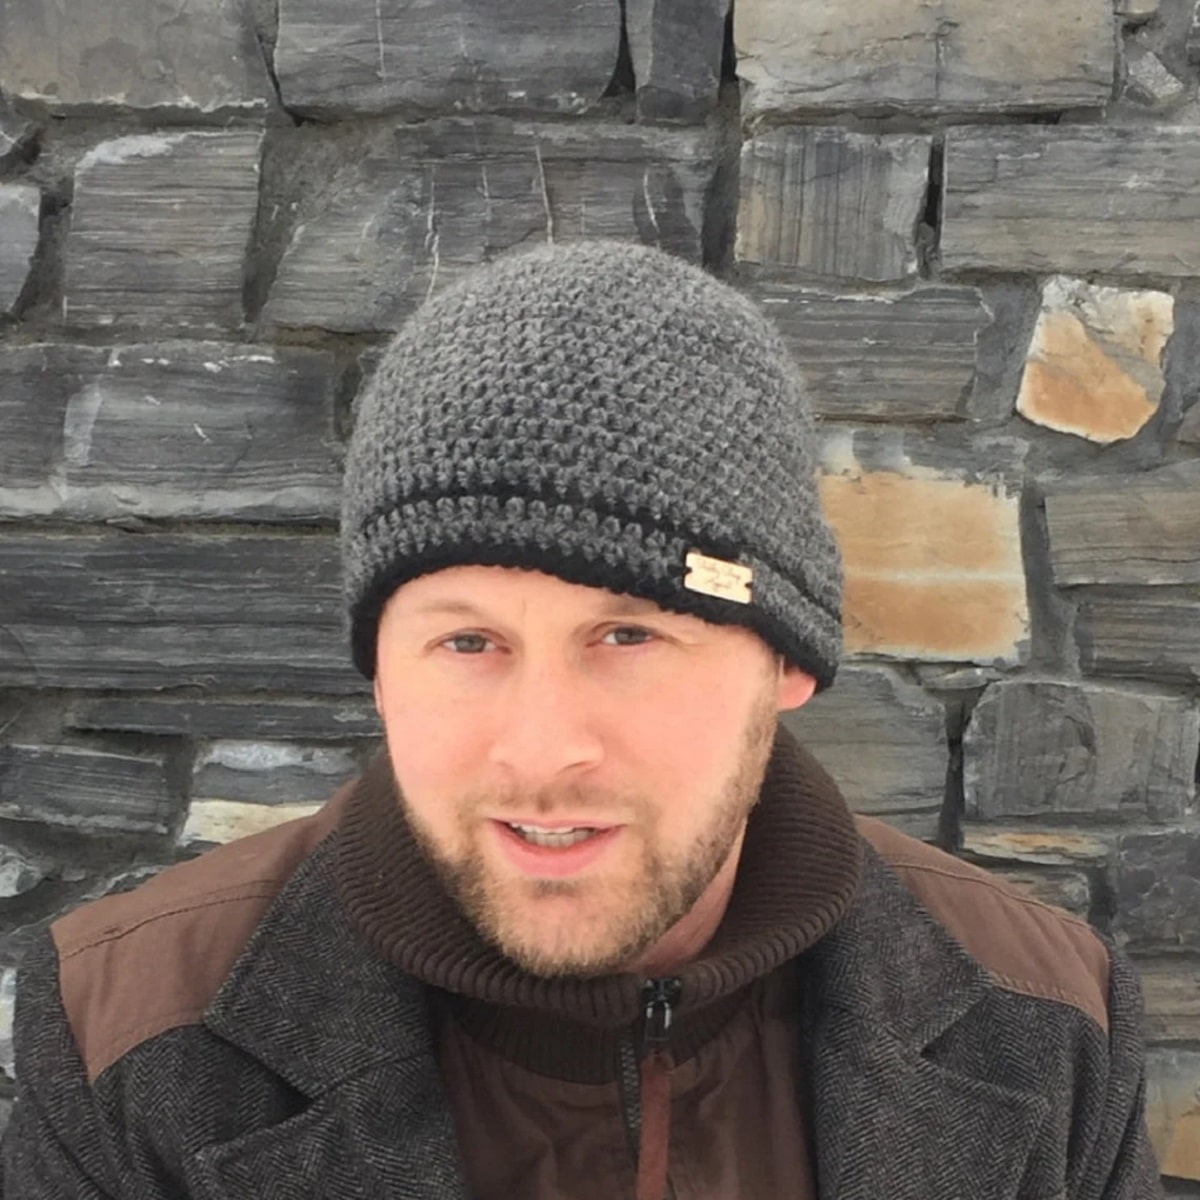  Man with a goatee standing in front of a stone wall wearing a gray beanie hat with a black band around the bottom.